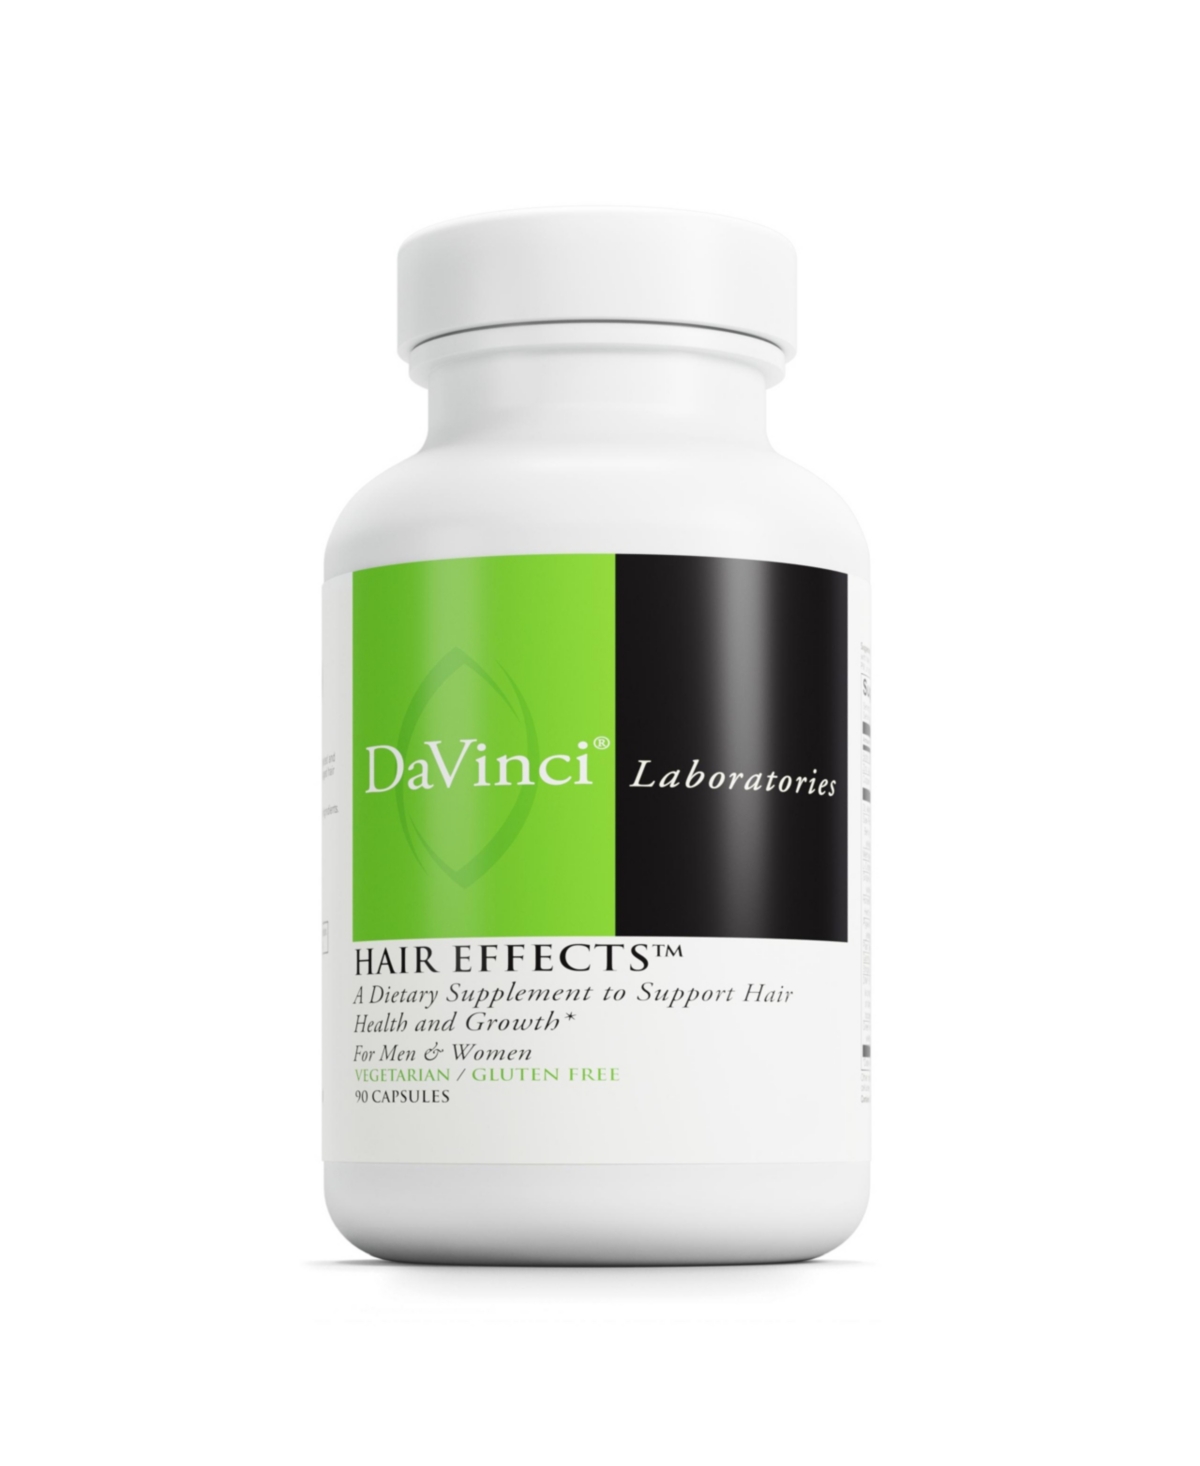 DaVinci Labs Hair Effects - Dietary Supplement to Support Healthy Hair Growth and Skin - With Biotin, Zinc, Copper, Saw Palmetto